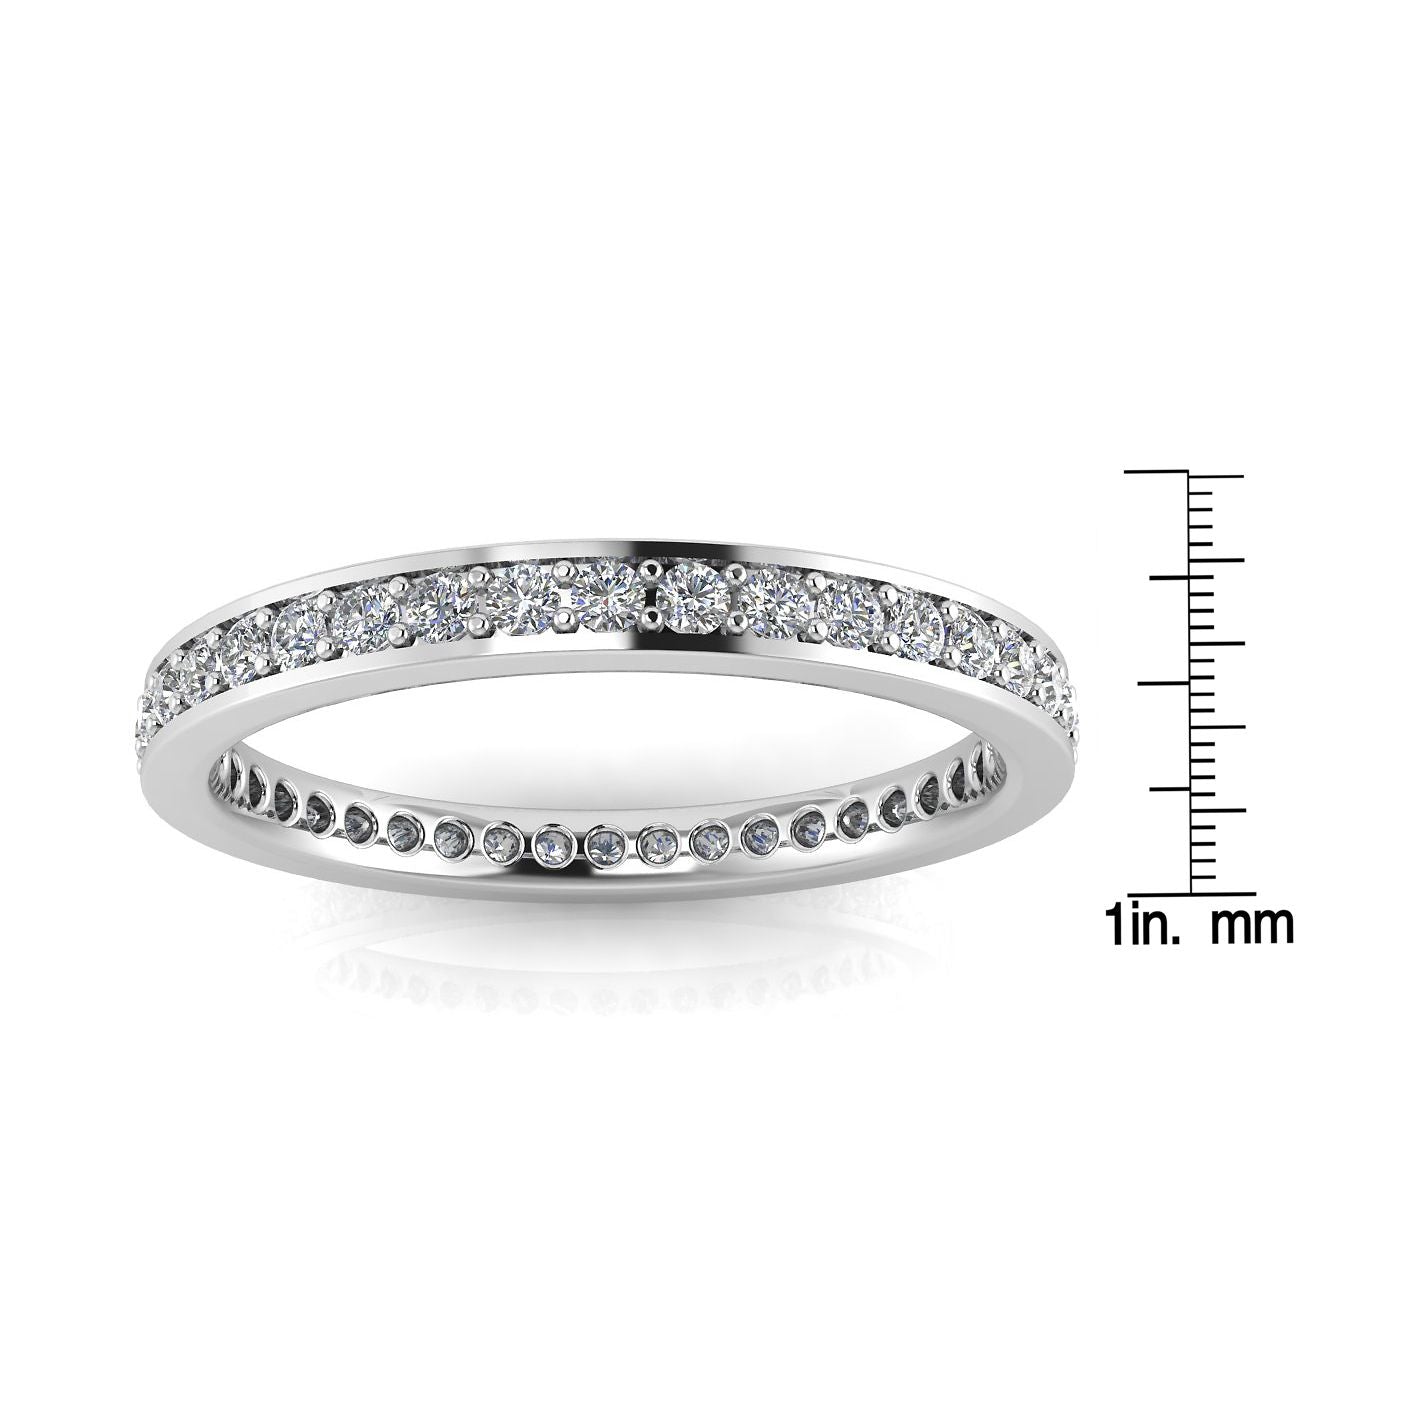 Round Brilliant Cut Diamond Channel Pave Set Eternity Ring In 14k White Gold  (0.96ct. Tw.) Ring Size 6.5